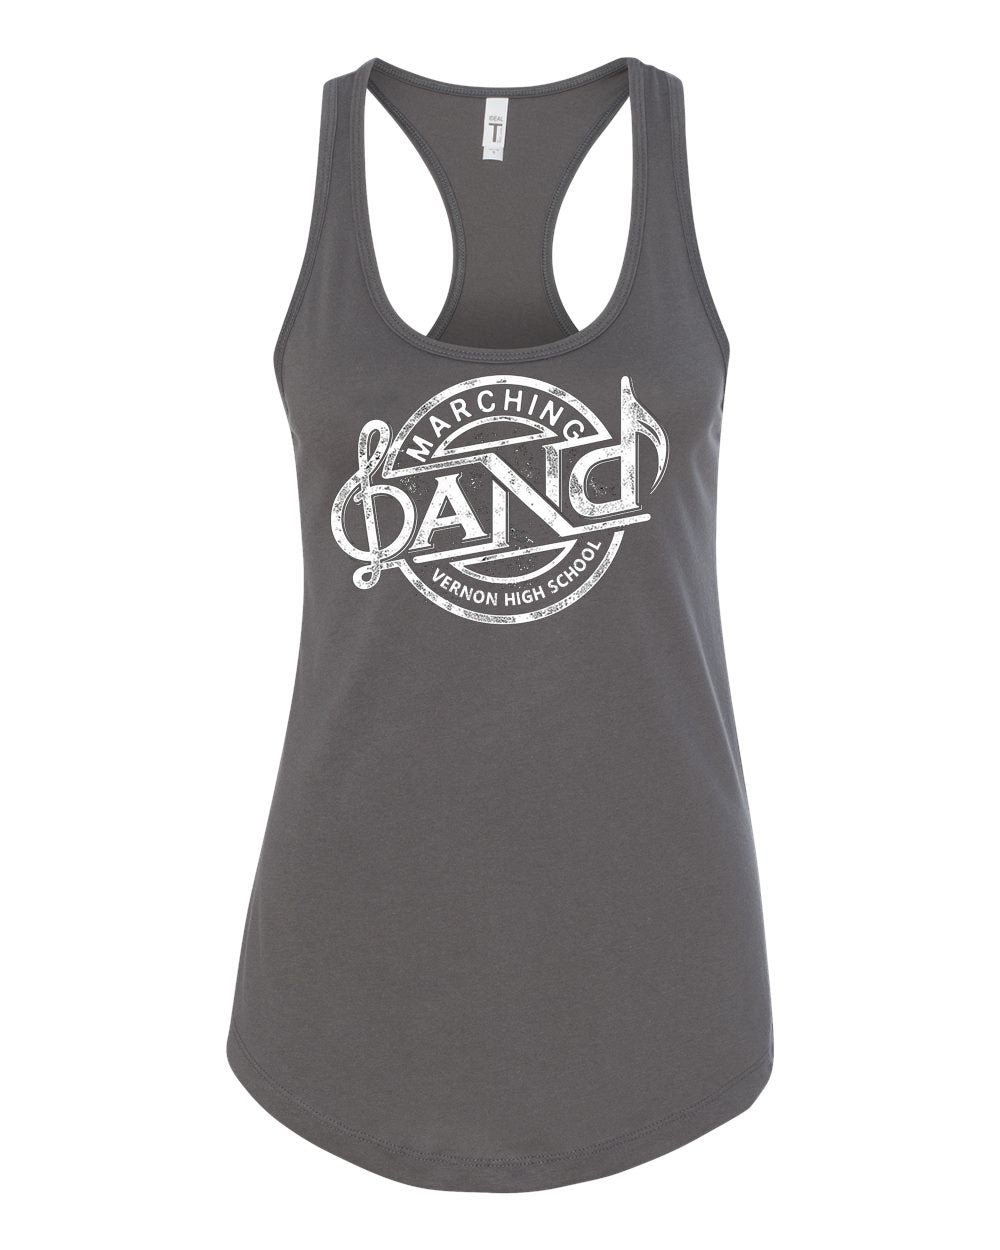 Vernon Marching Band Design 1 Tank Top